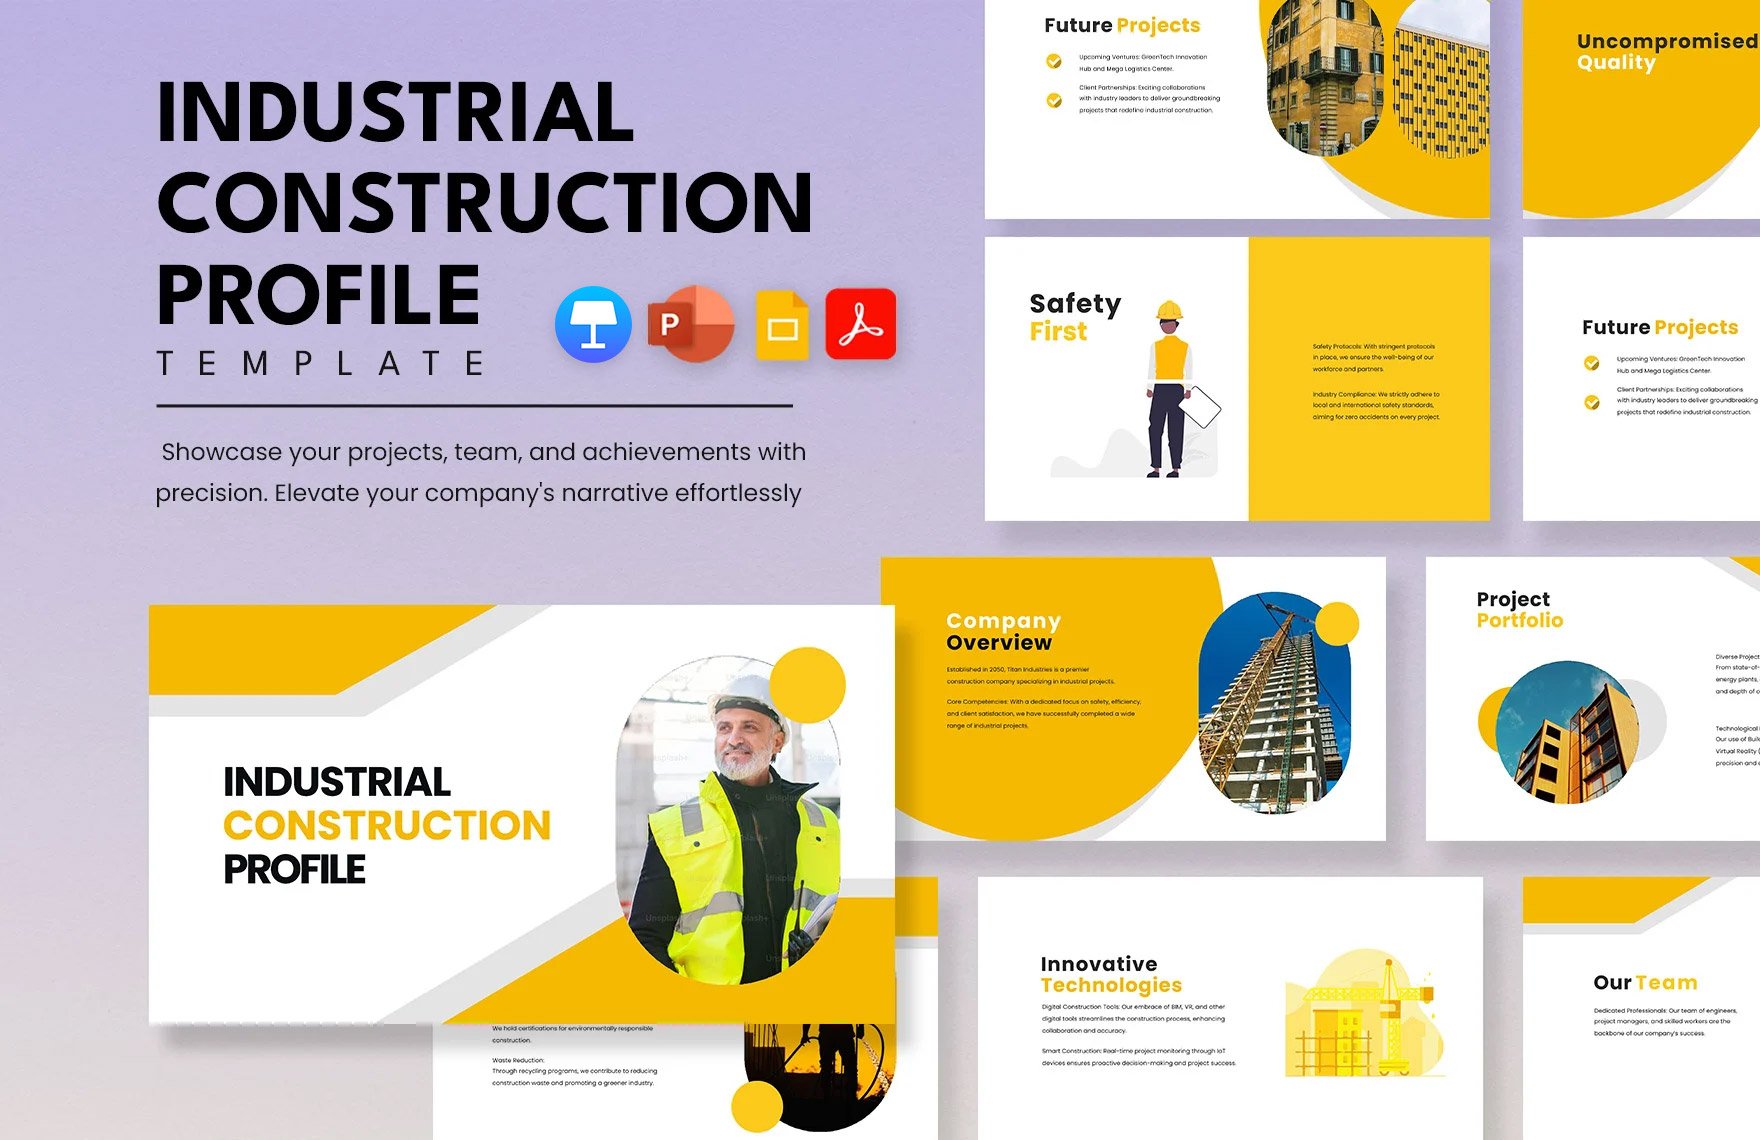 Industrial Construction Profile Template